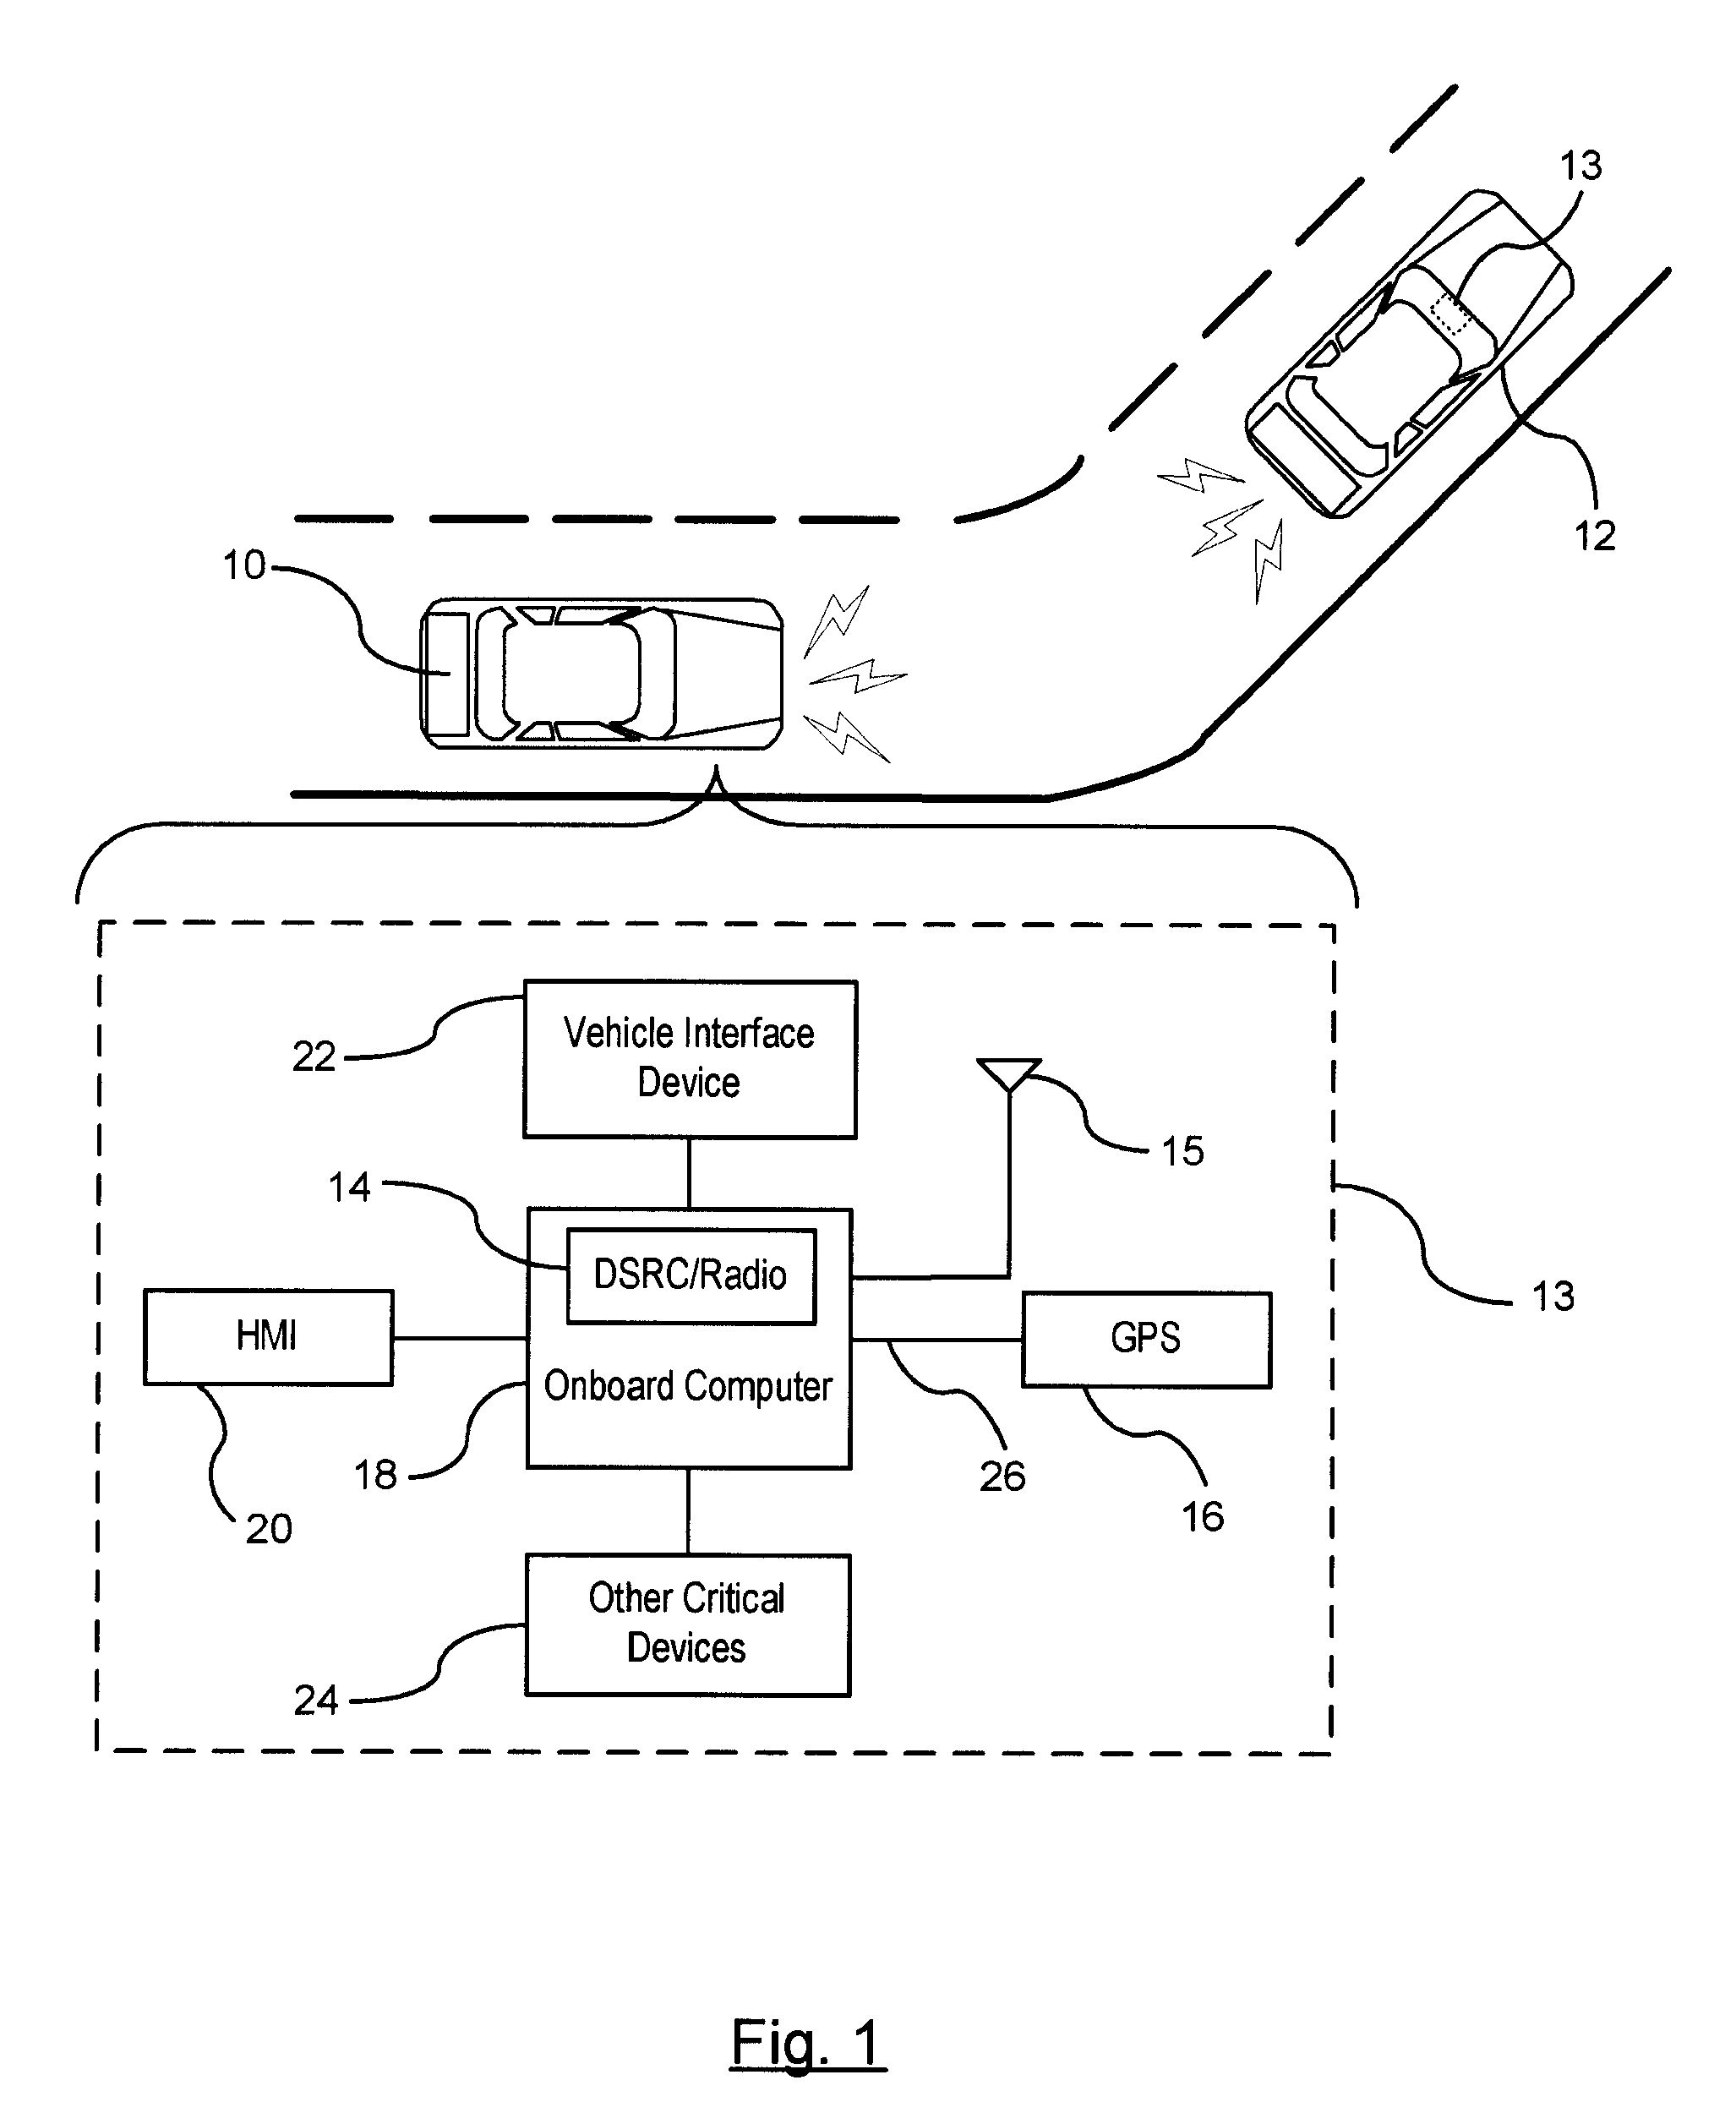 Inter-vehicle communication feature awareness and diagnosis system